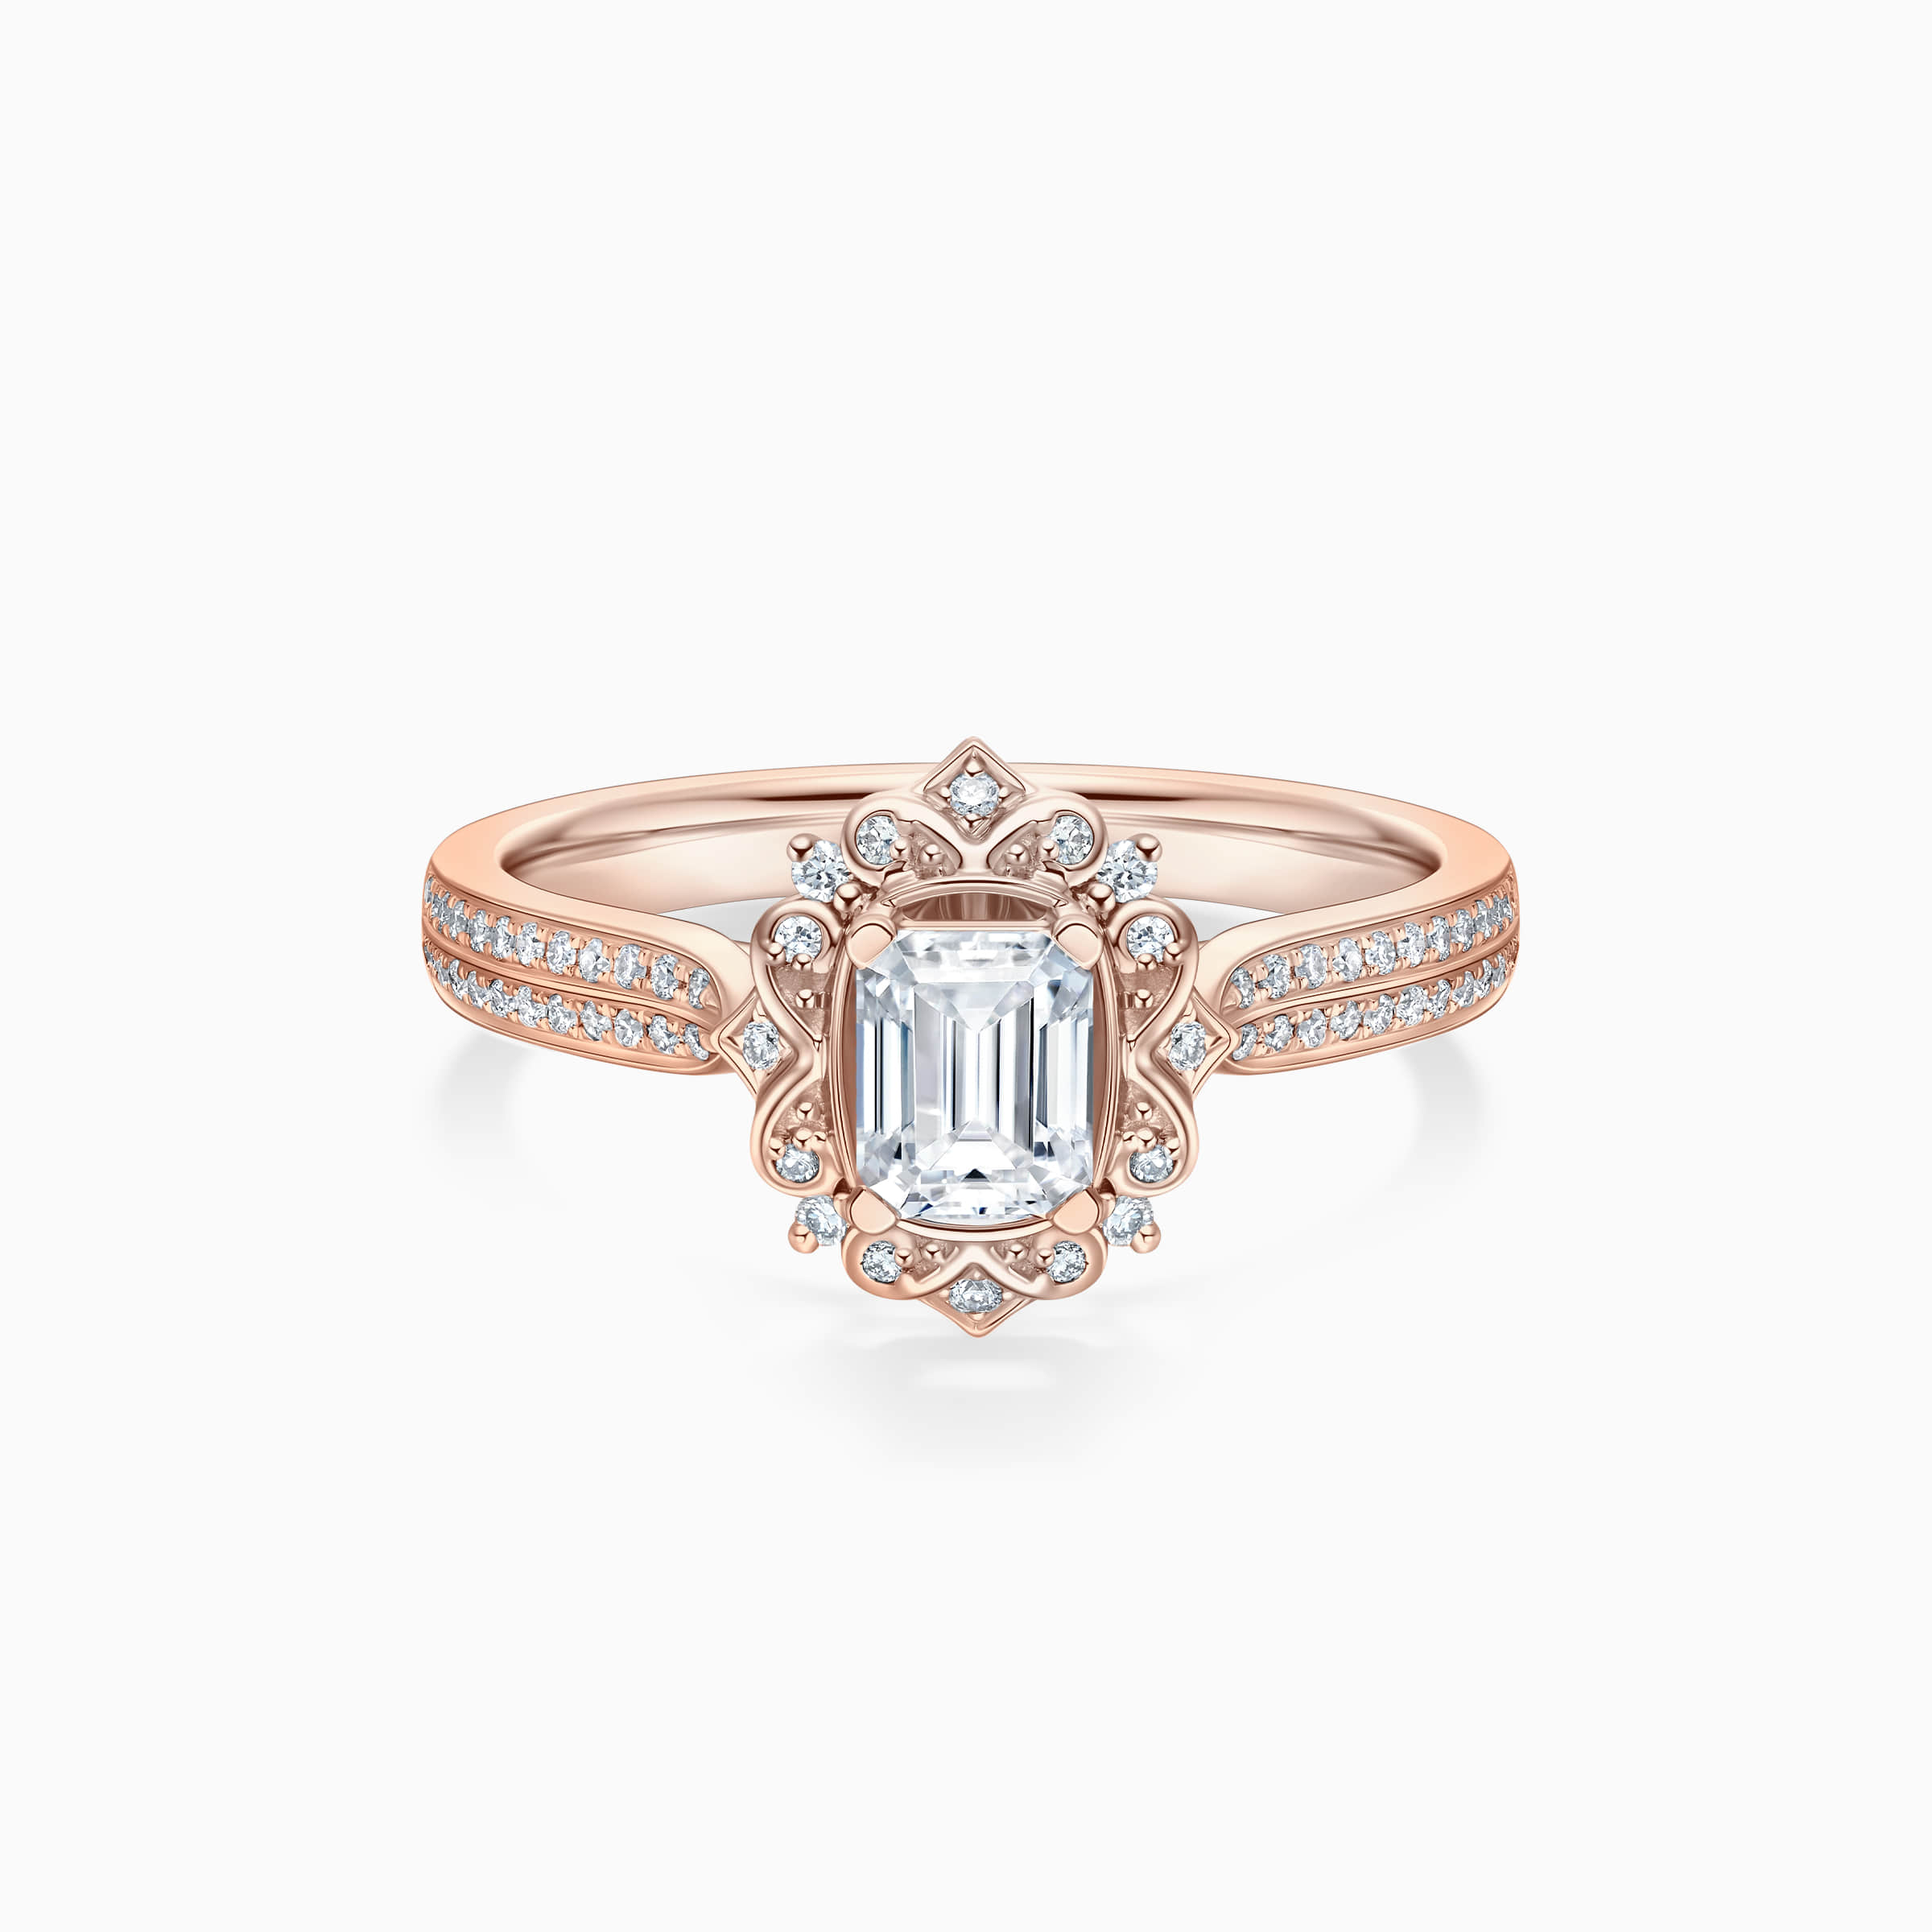 Darry Ring vintage emerald cut engagement ring in rose gold